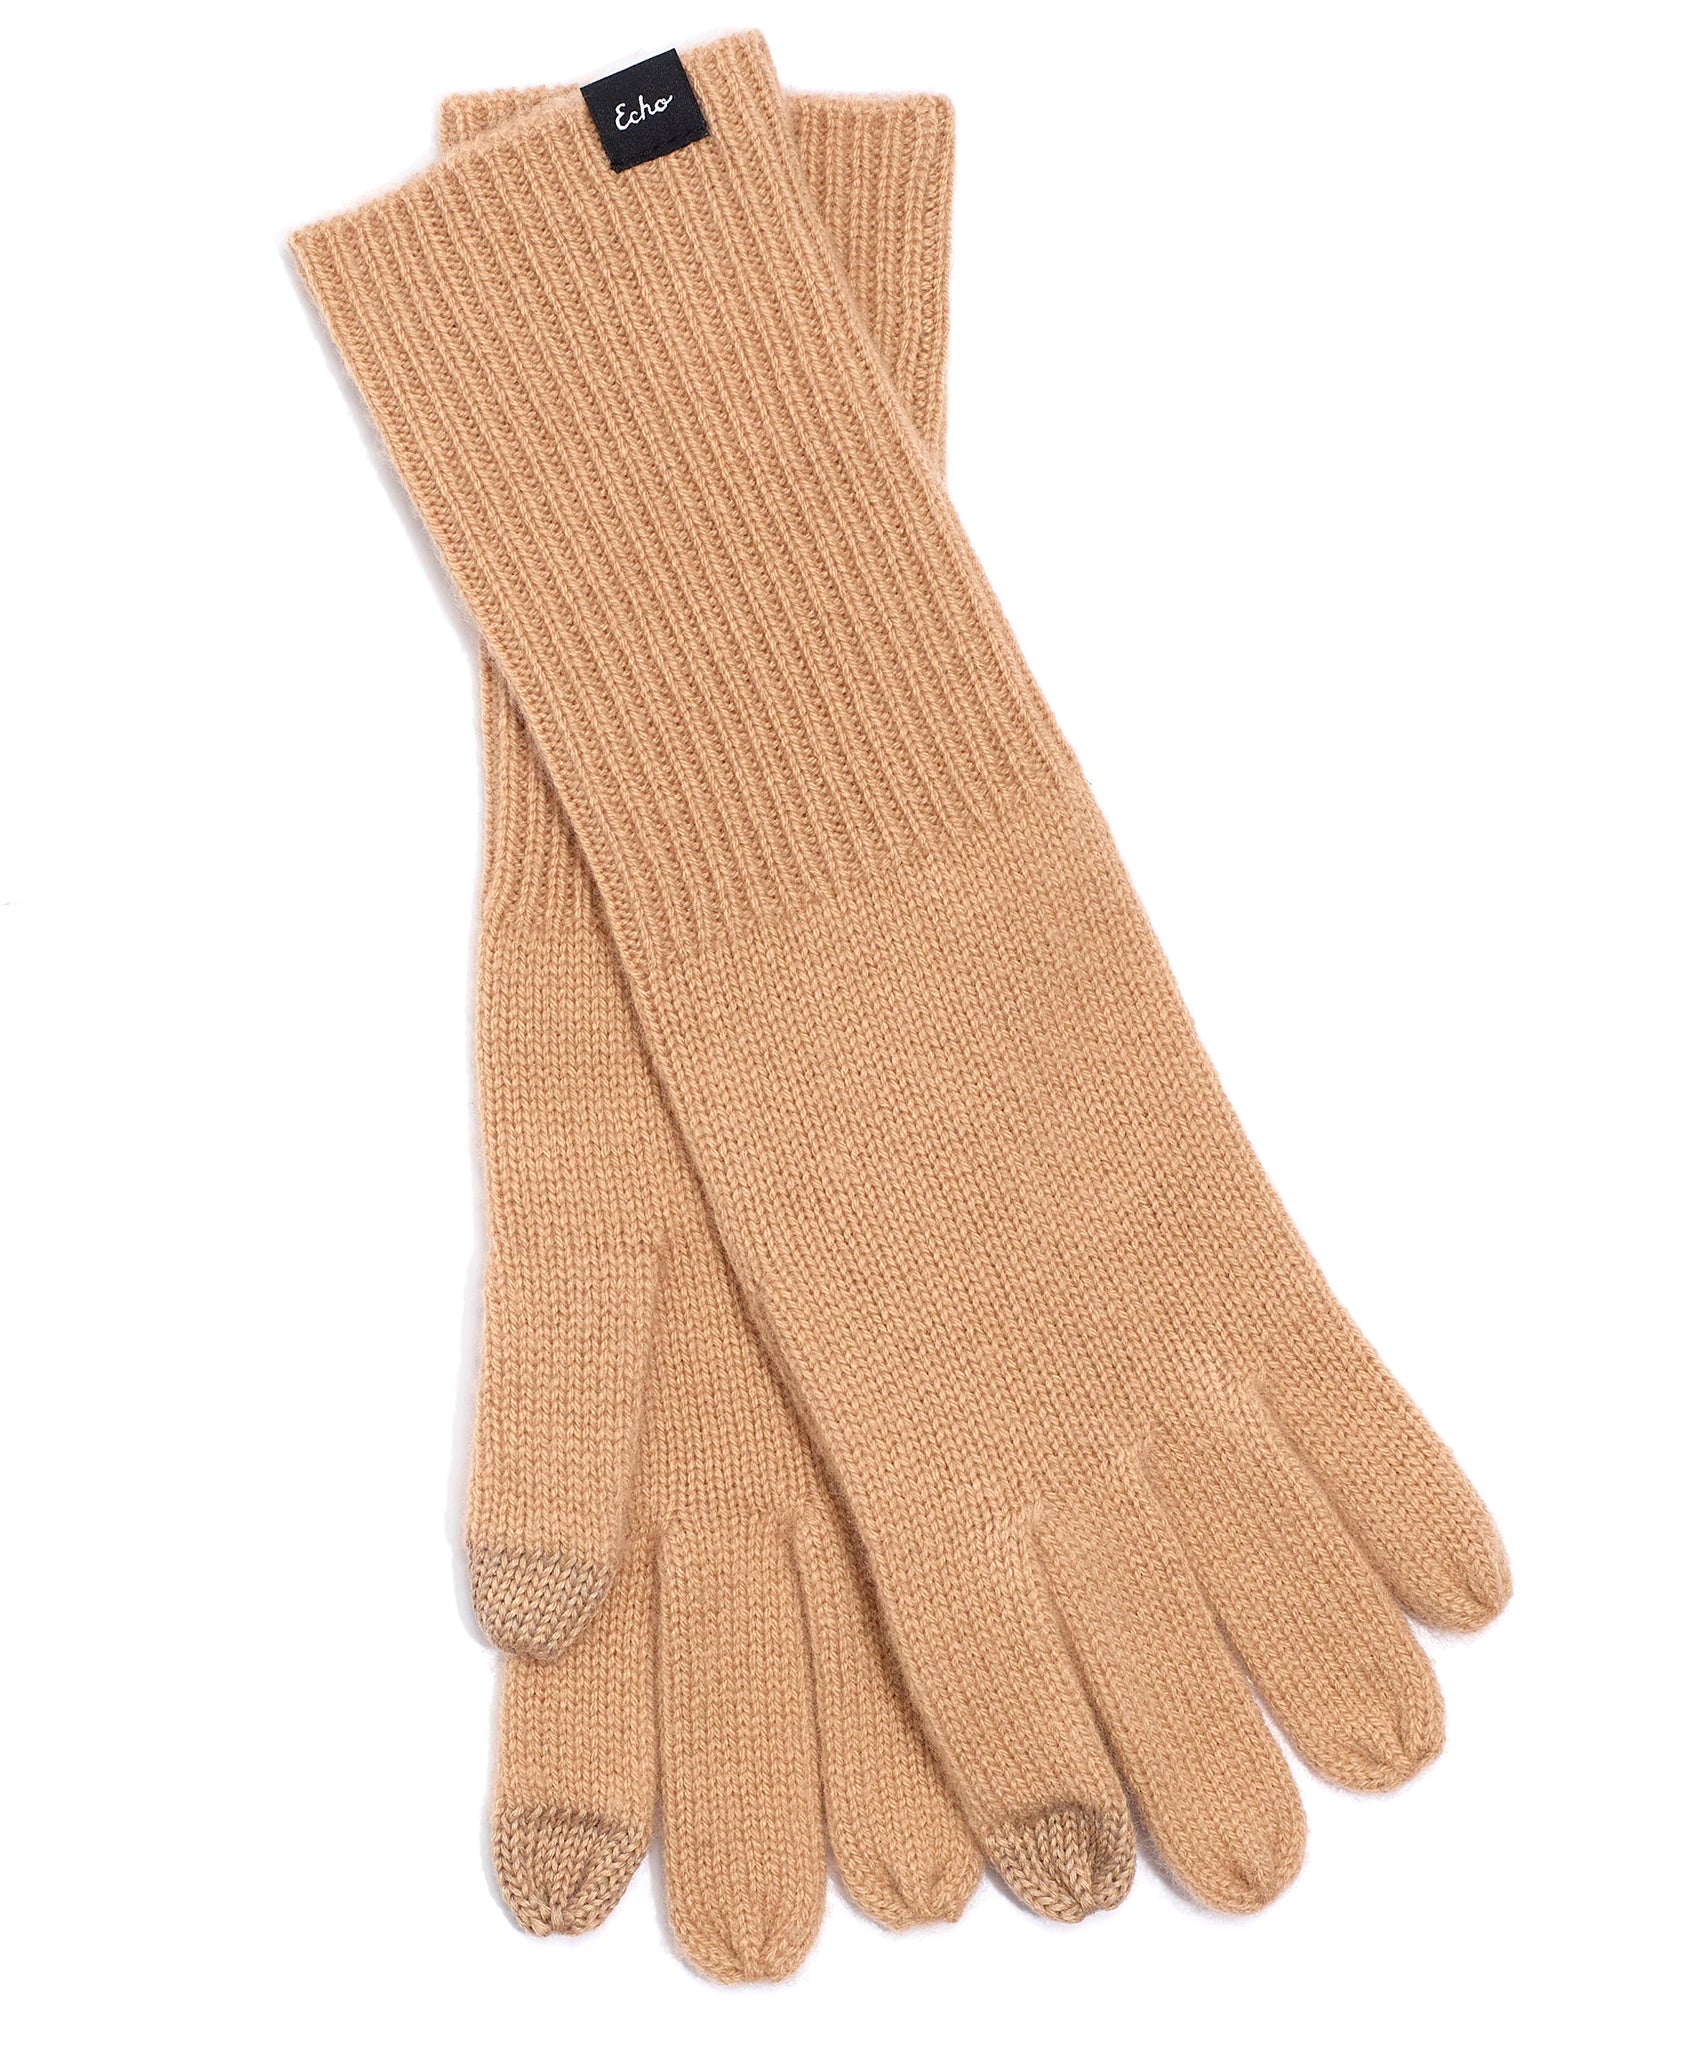 Wool/Cashmere  Gloves in color Camel